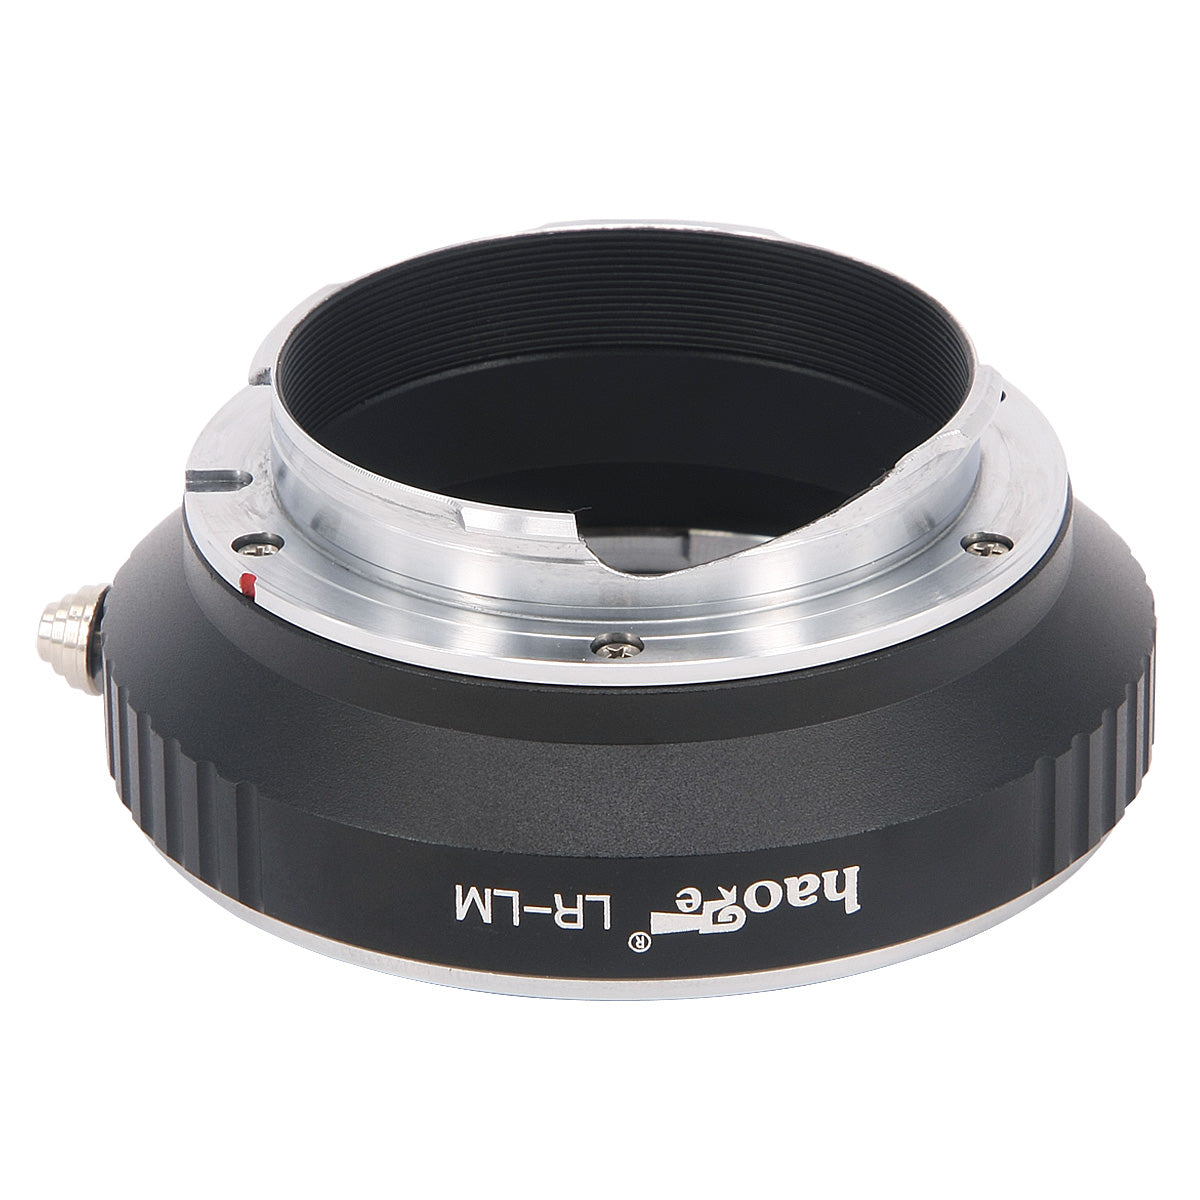 Haoge Lens Mount Adapter for Leica R mount Lens to Leica M-mount Camera such as M240, M240P, M262, M3, M2, M1, M4, M5, CL, M6, MP, M7, M8, M9, M9-P, M Monochrom, M-E, M, M-P, M10, M-A